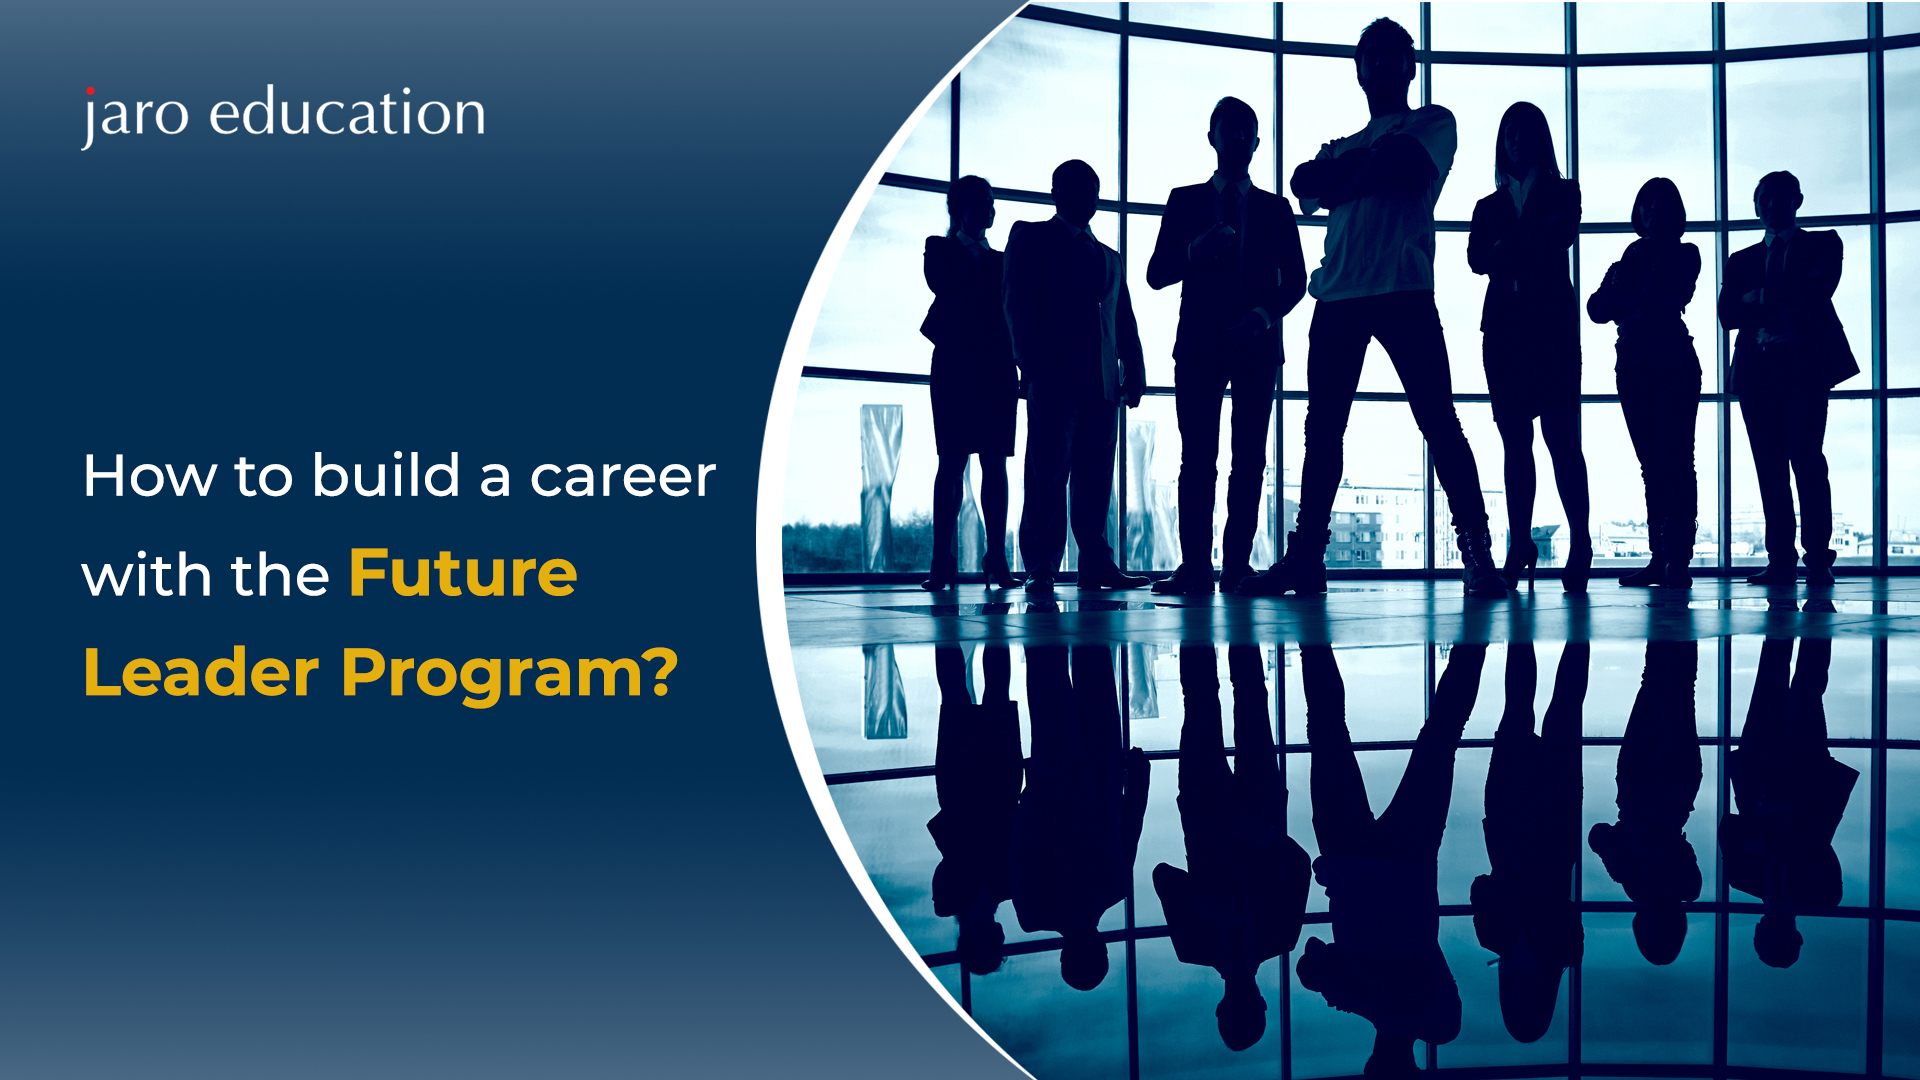 Take Your Career To The Next Level With The Future Leader Program